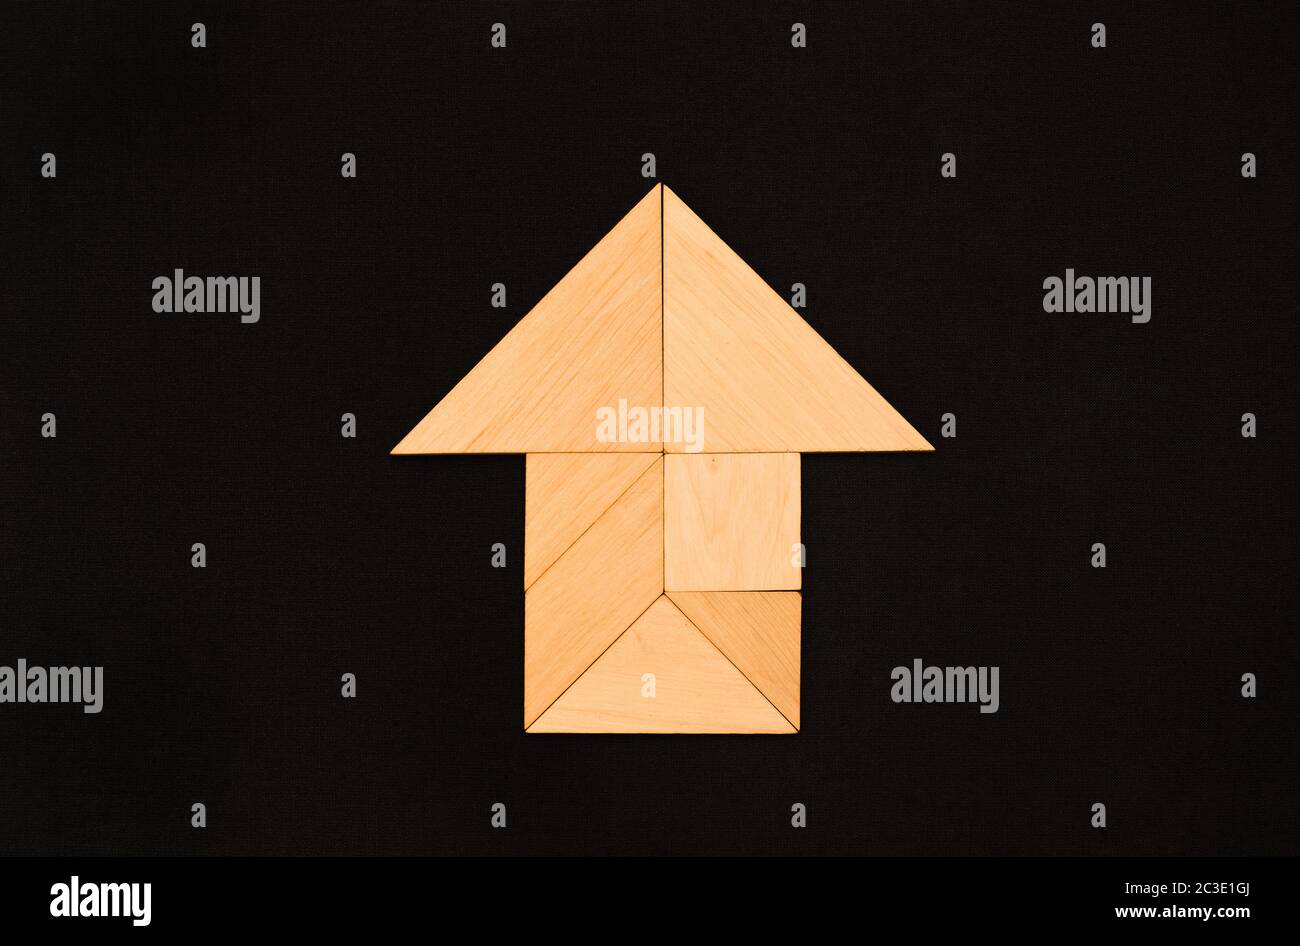 Flat lay - pictogram, symbol, icon of house and arrow made of wooden tangram pieces. Unicolor background made of dark fabric texture. Stock Photo